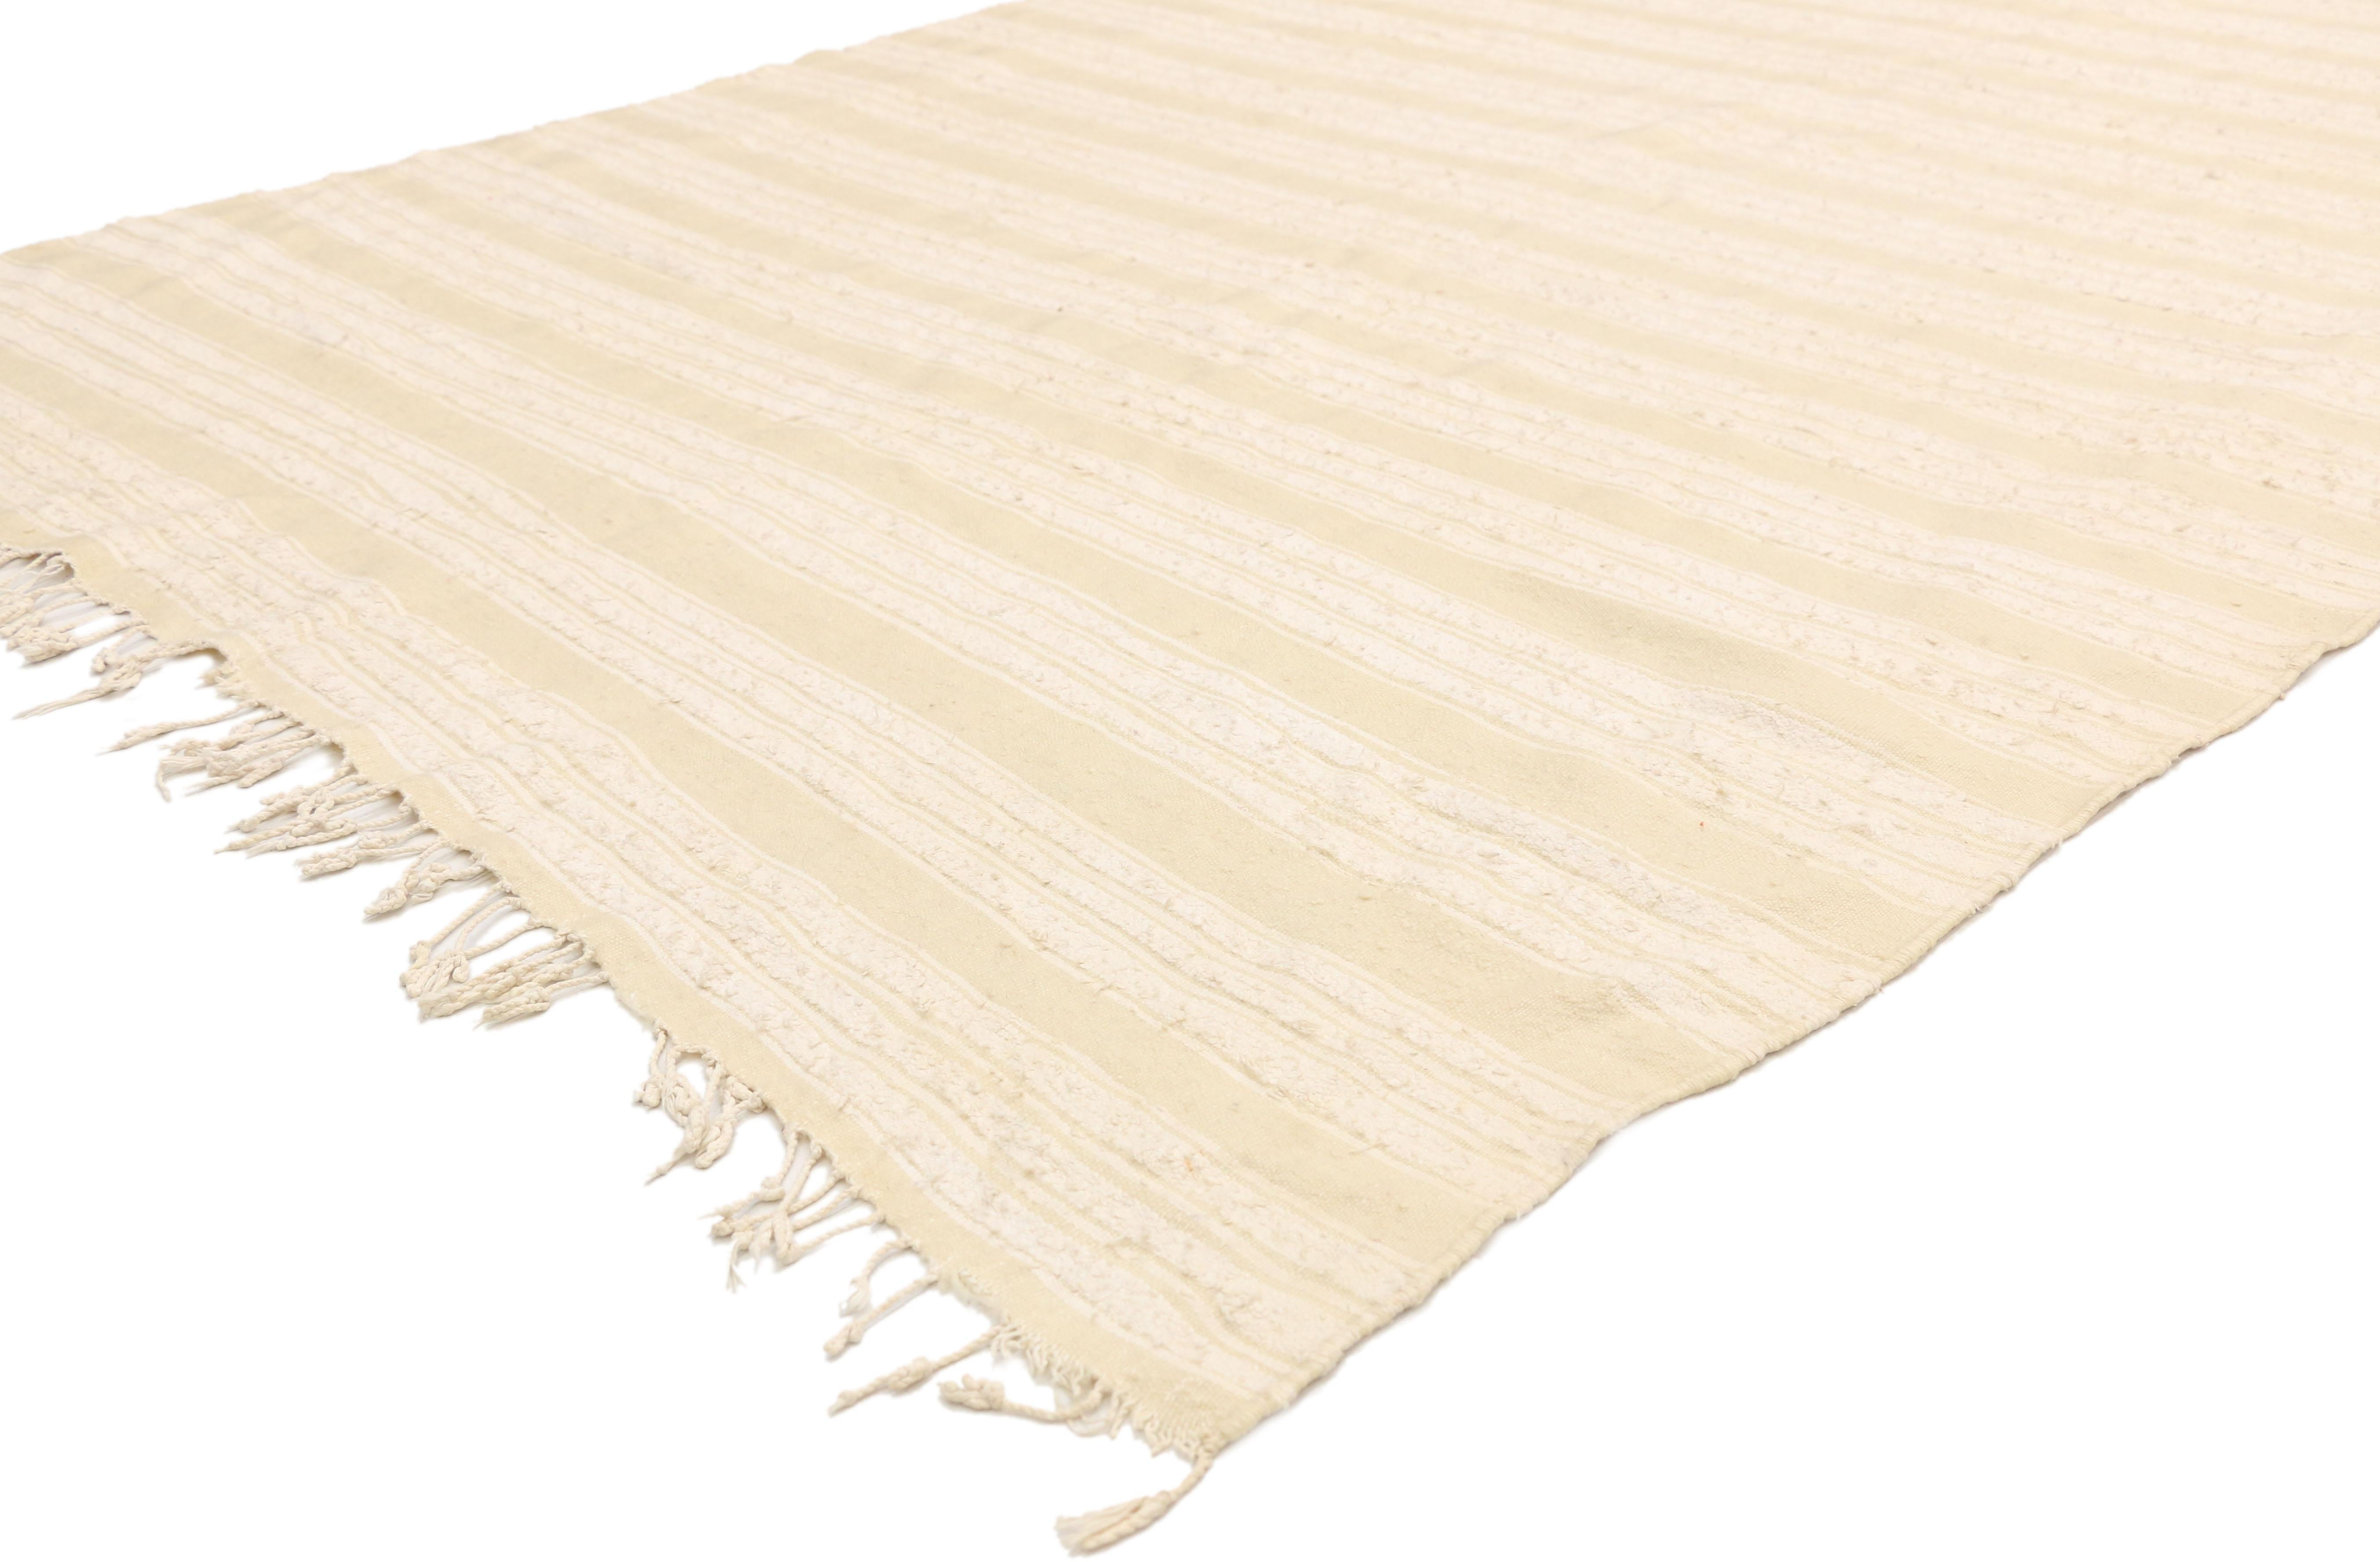 20828 Vintage Moroccan Kilim rug with Minimalist Scandinavian Style, neutral color rug 04'08 x 09'07. This neutral flat-weave Kilim rug emanates function and versatility with relaxed hygge vibes. This handwoven wool vintage Moroccan Kilim rug